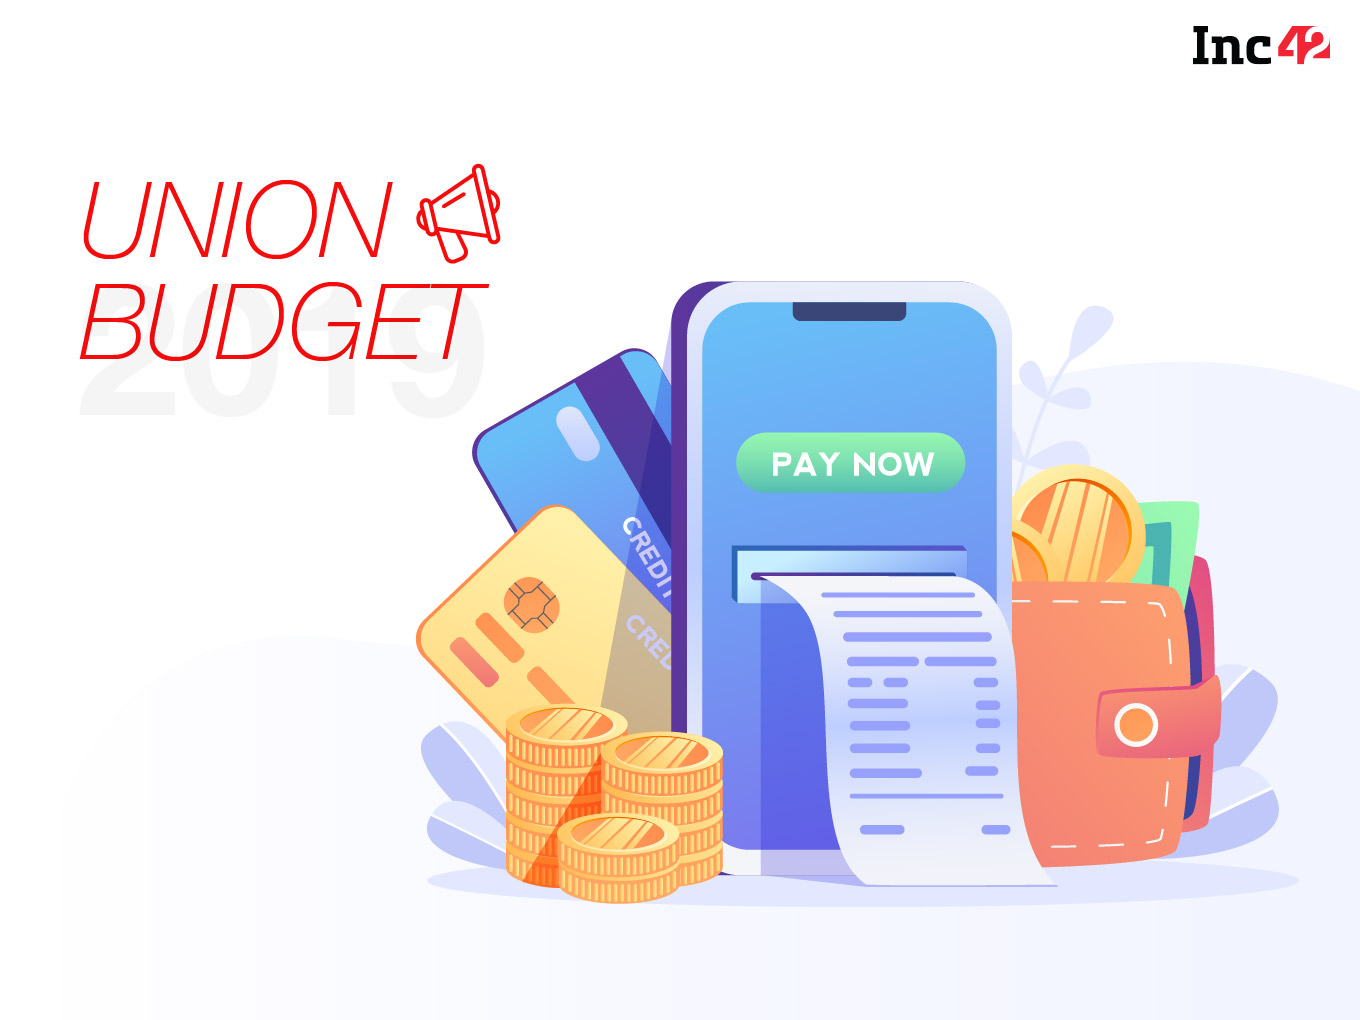 Union Budget 2019: Sitharaman’s Aims To Boost India’s Digital Payment